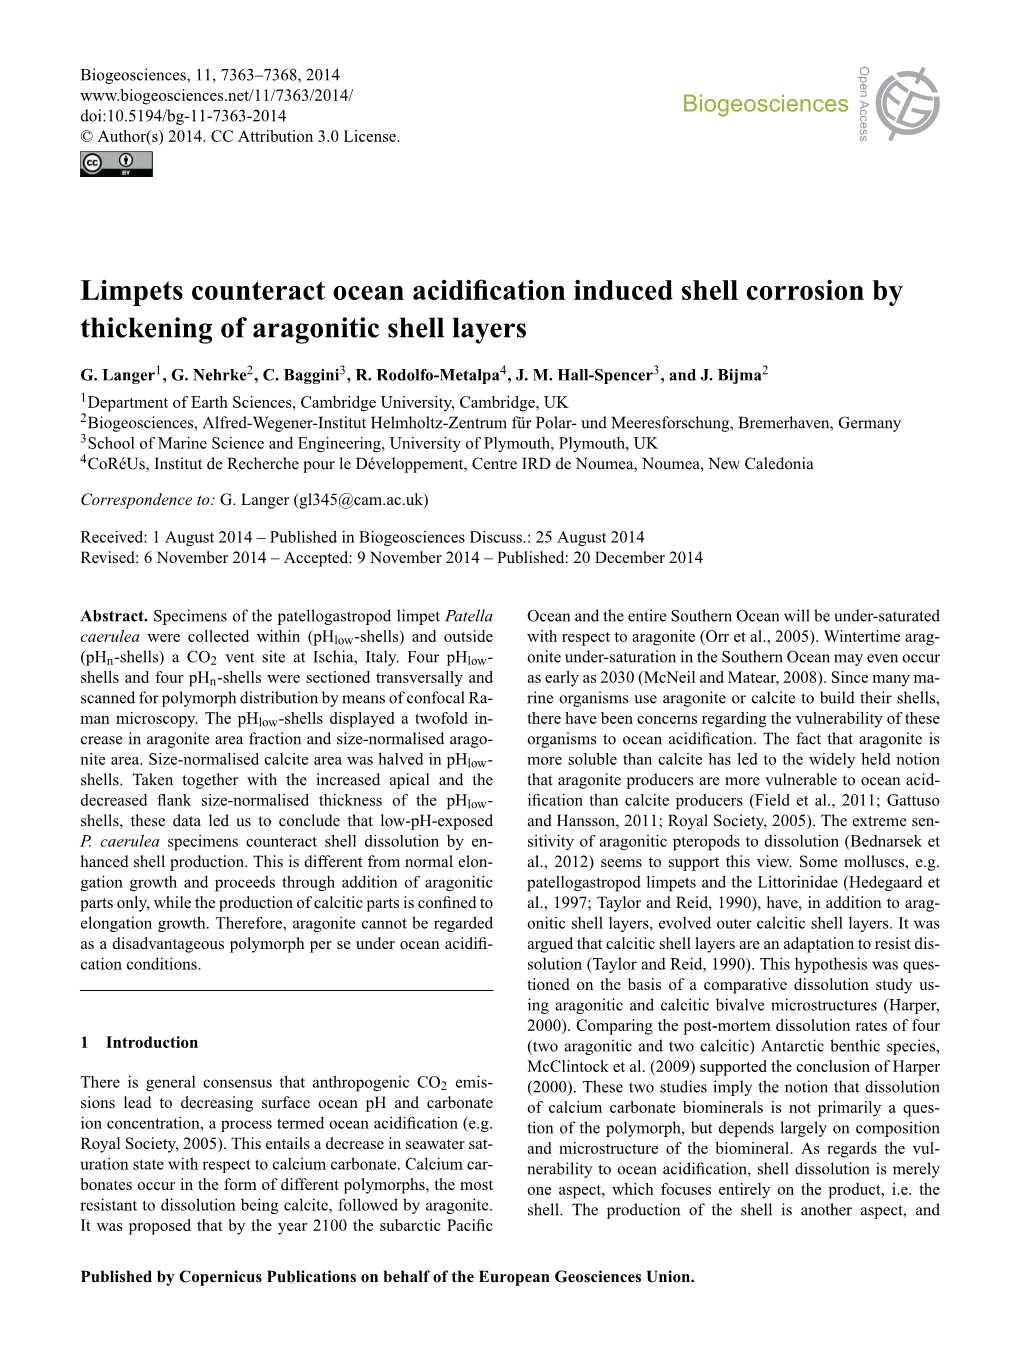 Limpets Counteract Ocean Acidification Induced Shell